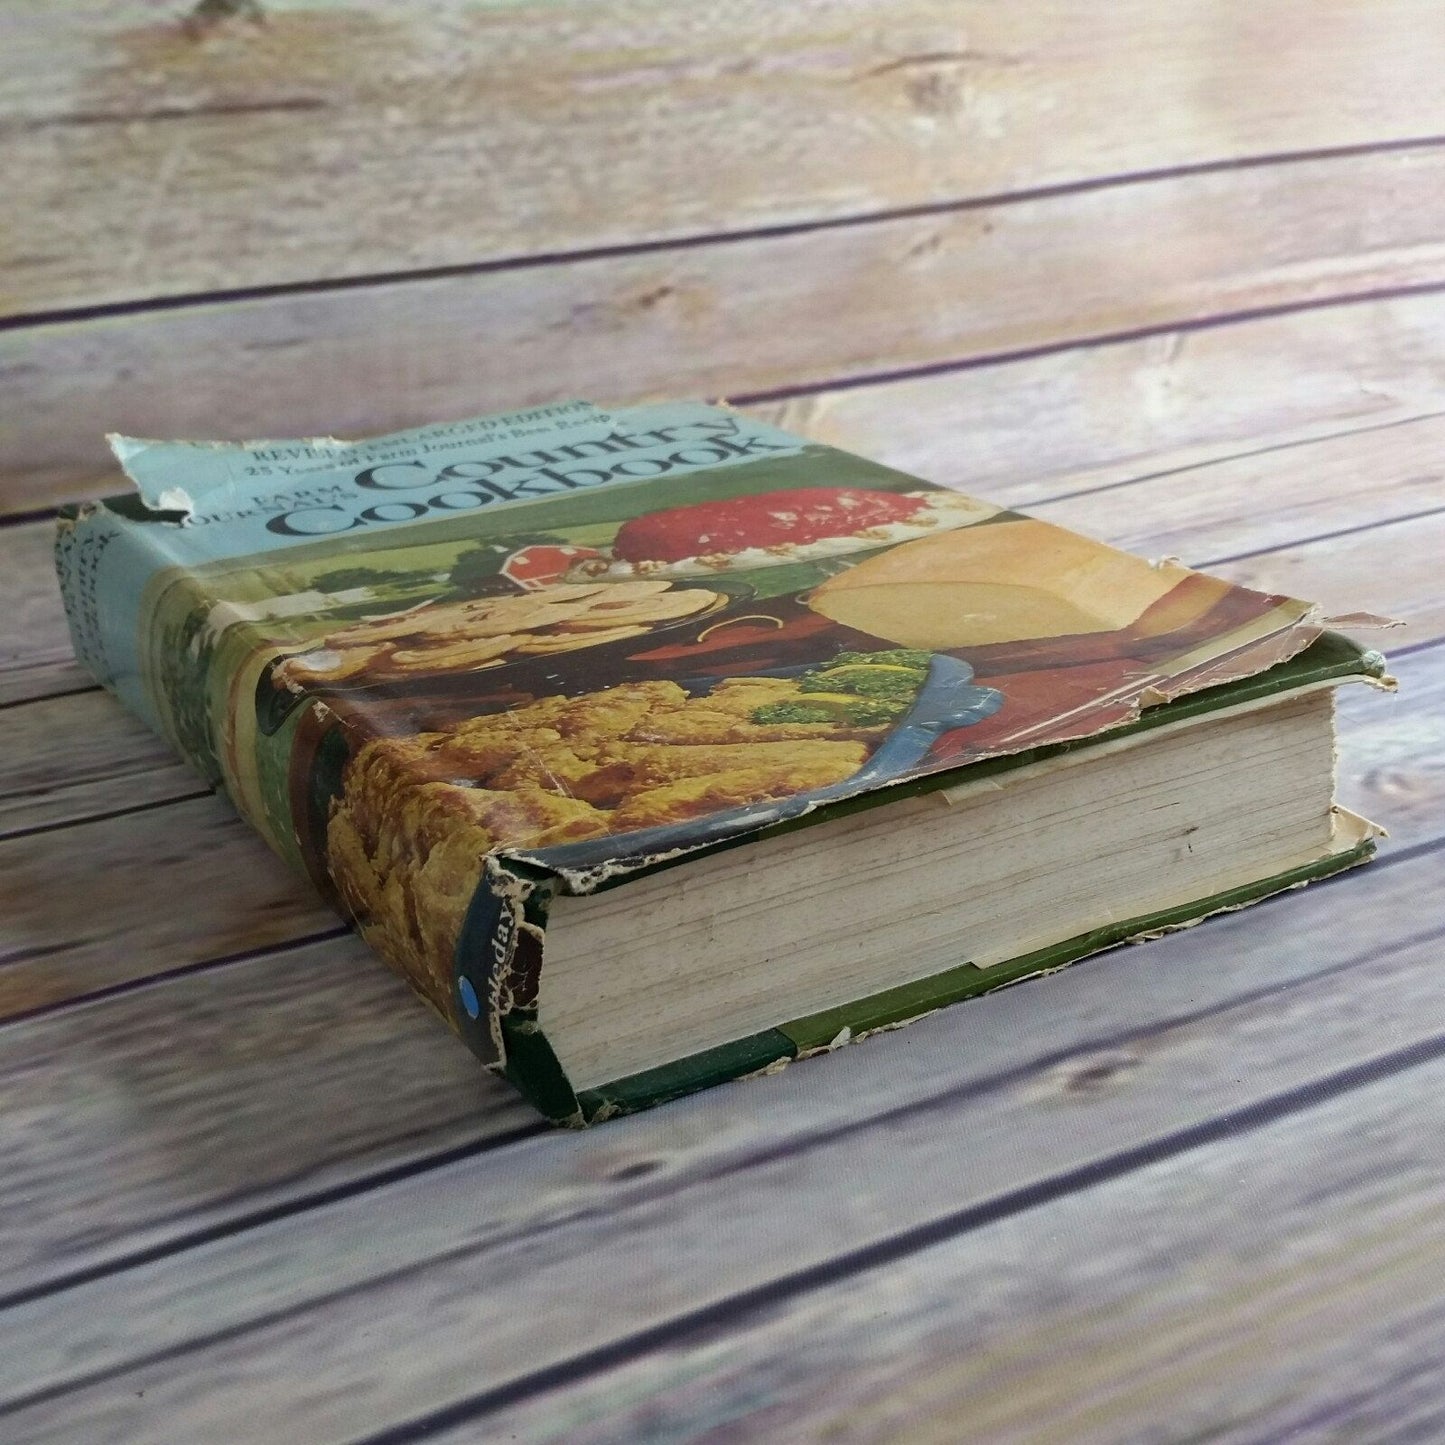 Vintage Farm Journal Country Cookbook Revised Enlarged Edition 1972 WITH Dust Jacket Hardcover